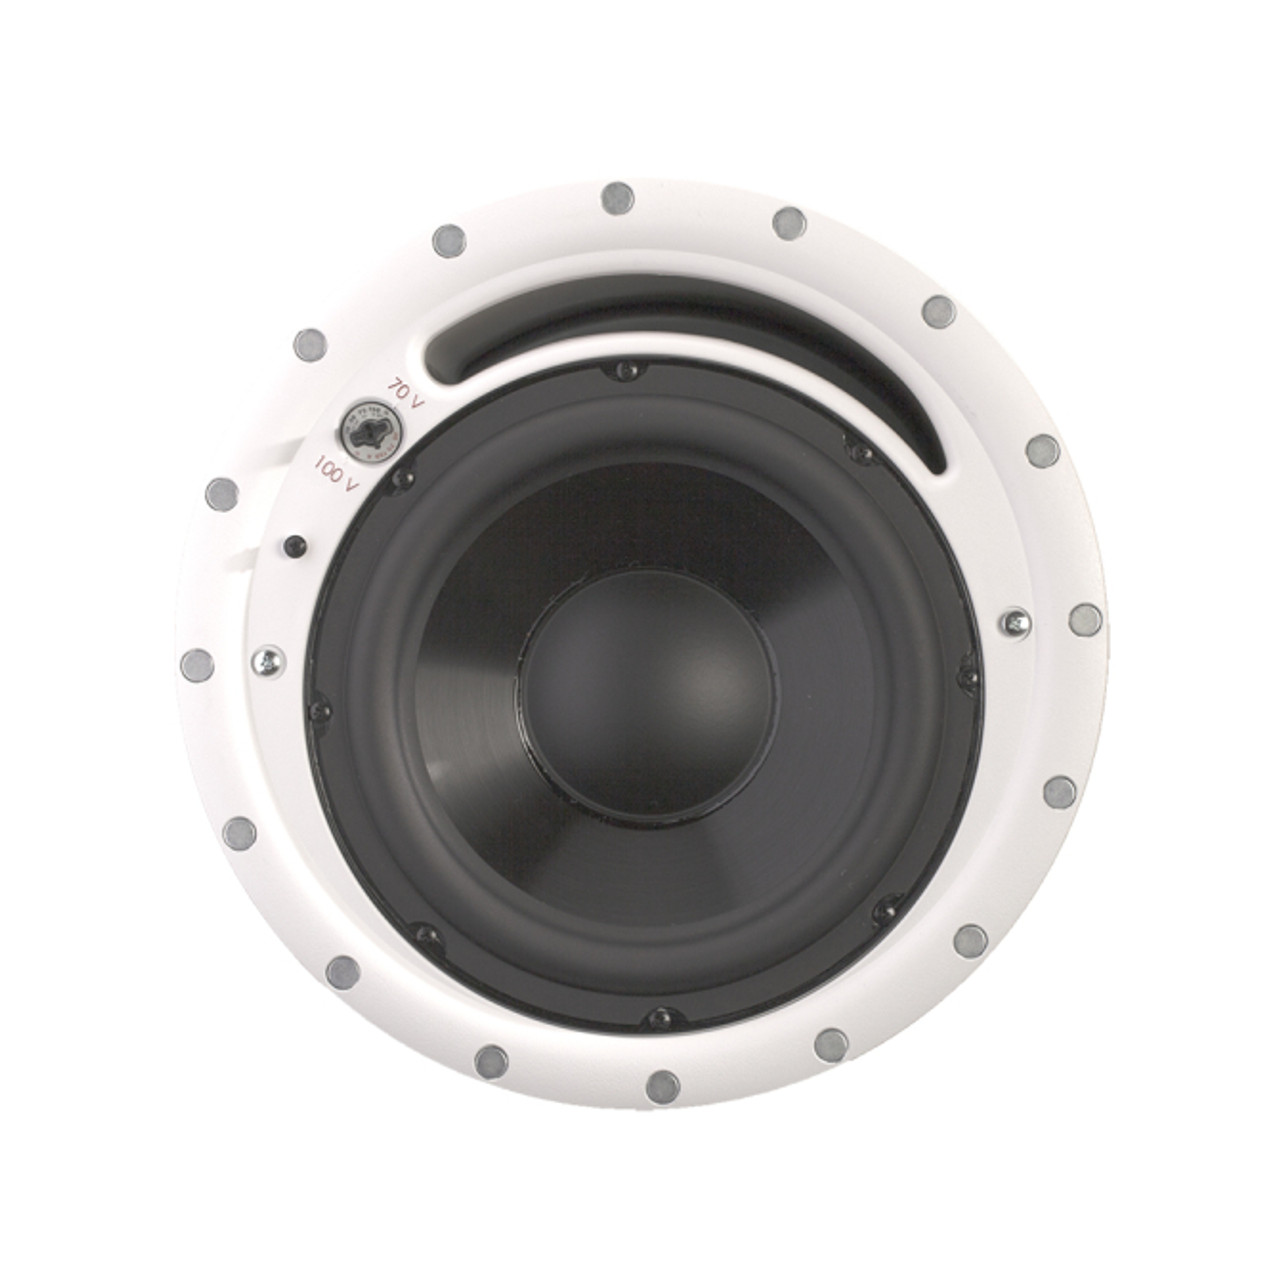 SoundTube CM1001D-T In Ceiling Subwoofer Kit with Deep Can and a Transformer (CM1001D-T-BK)